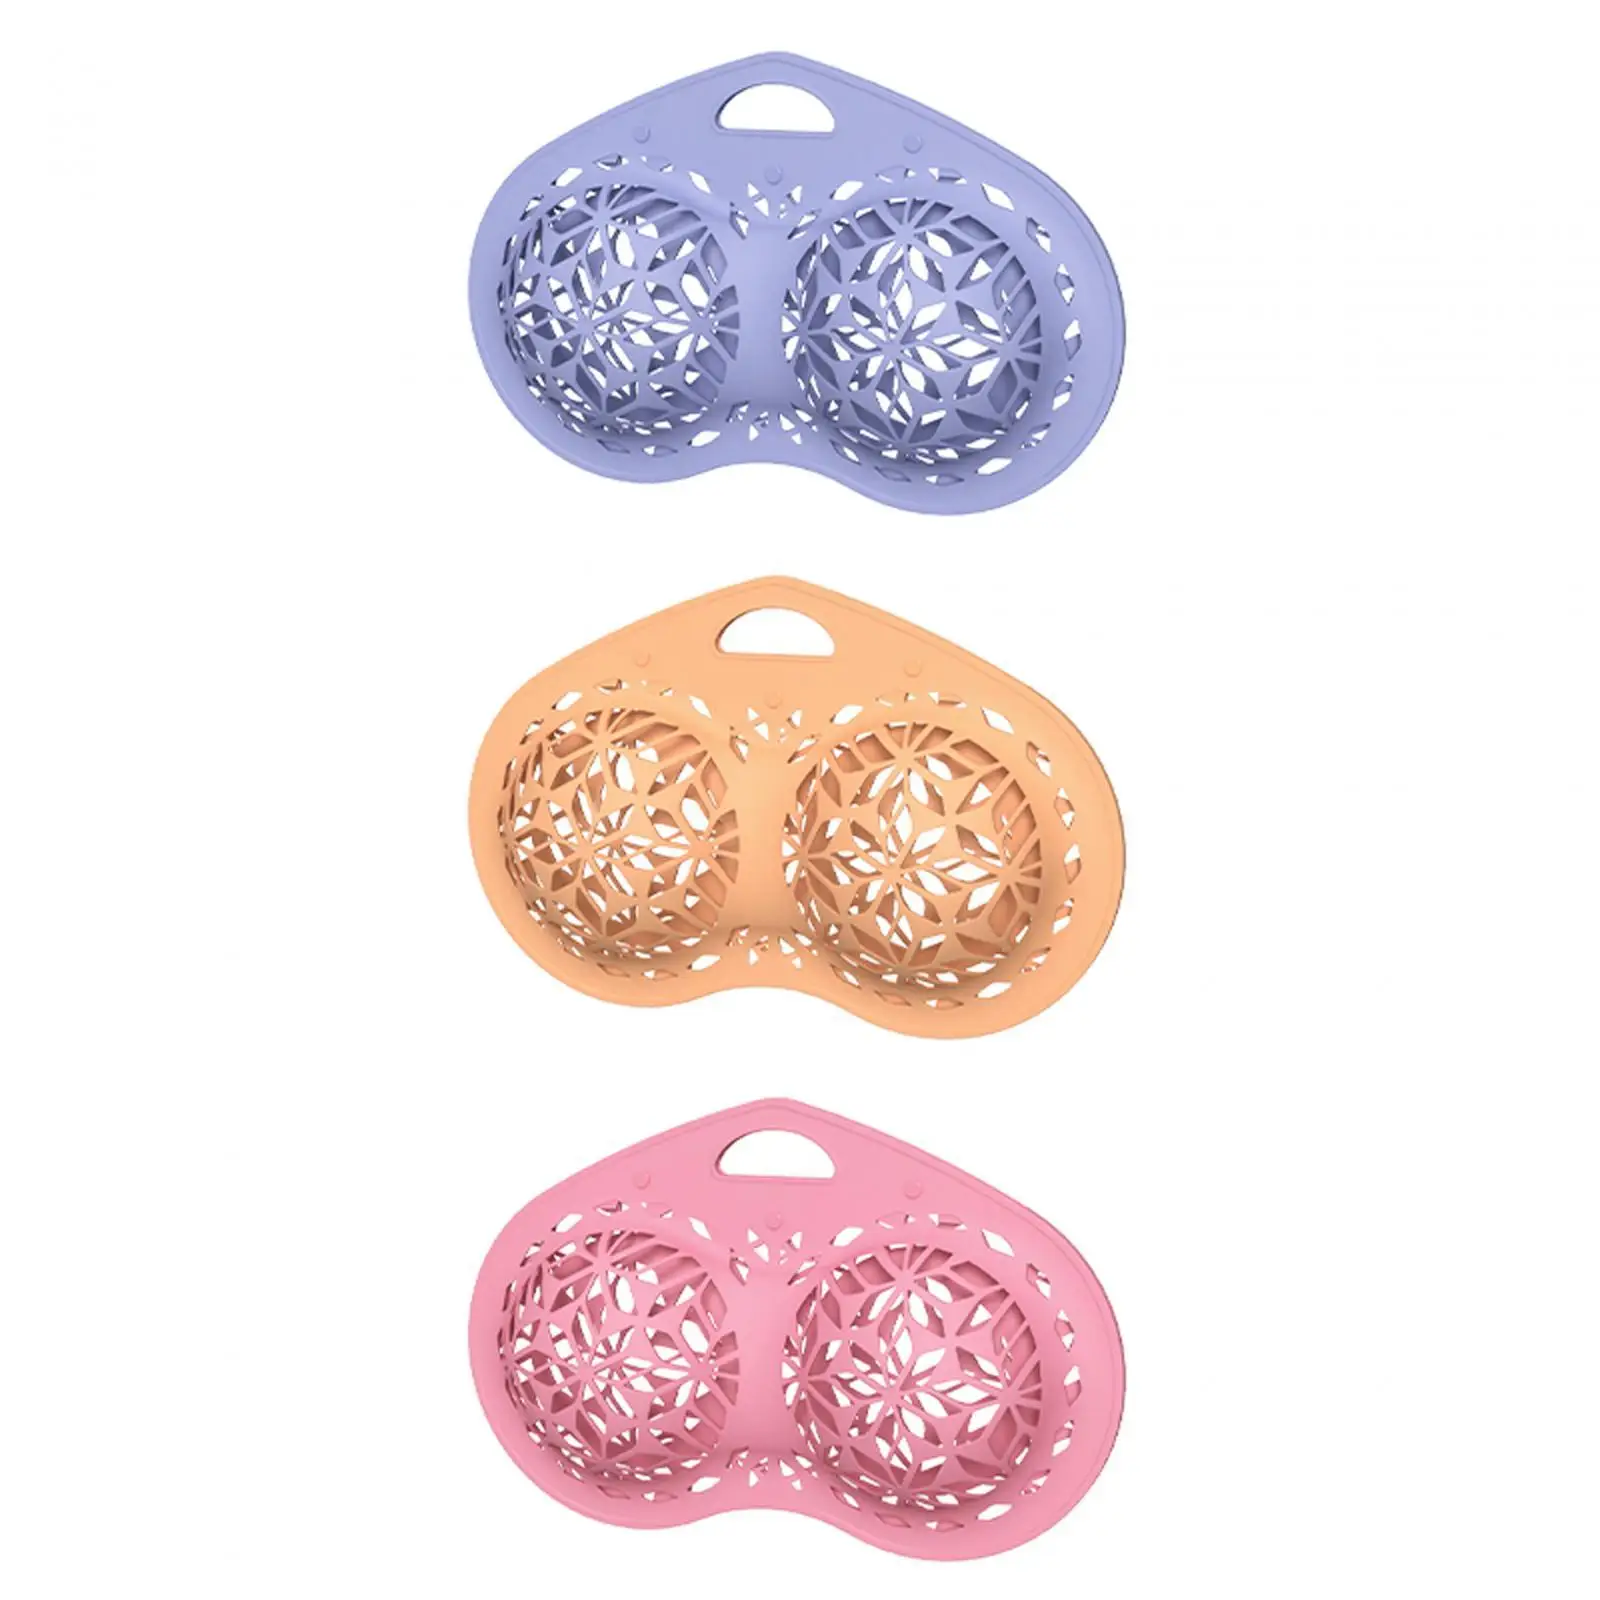 Silicone Bra Washing Bag Silicone Bra Laundry Bag Travel Lightweight Cleaning for Towel Scarf Underwear Ties Sports Bras